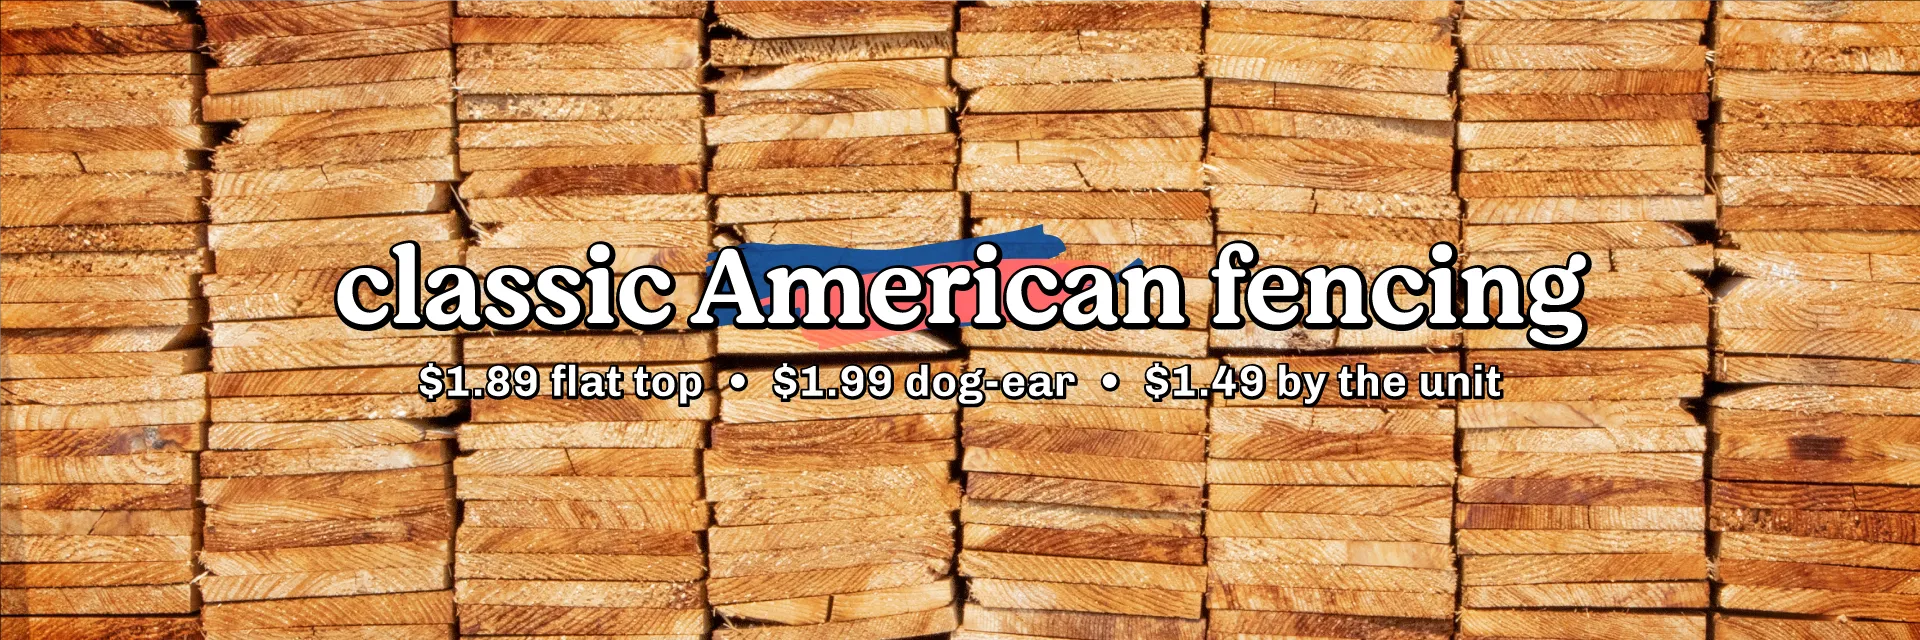 Classic American 6 ft. cedar fencing—flat topped for $1.89 each, $1.99 each for dog-earred, or only $1.49 each when purchasing by the unit.